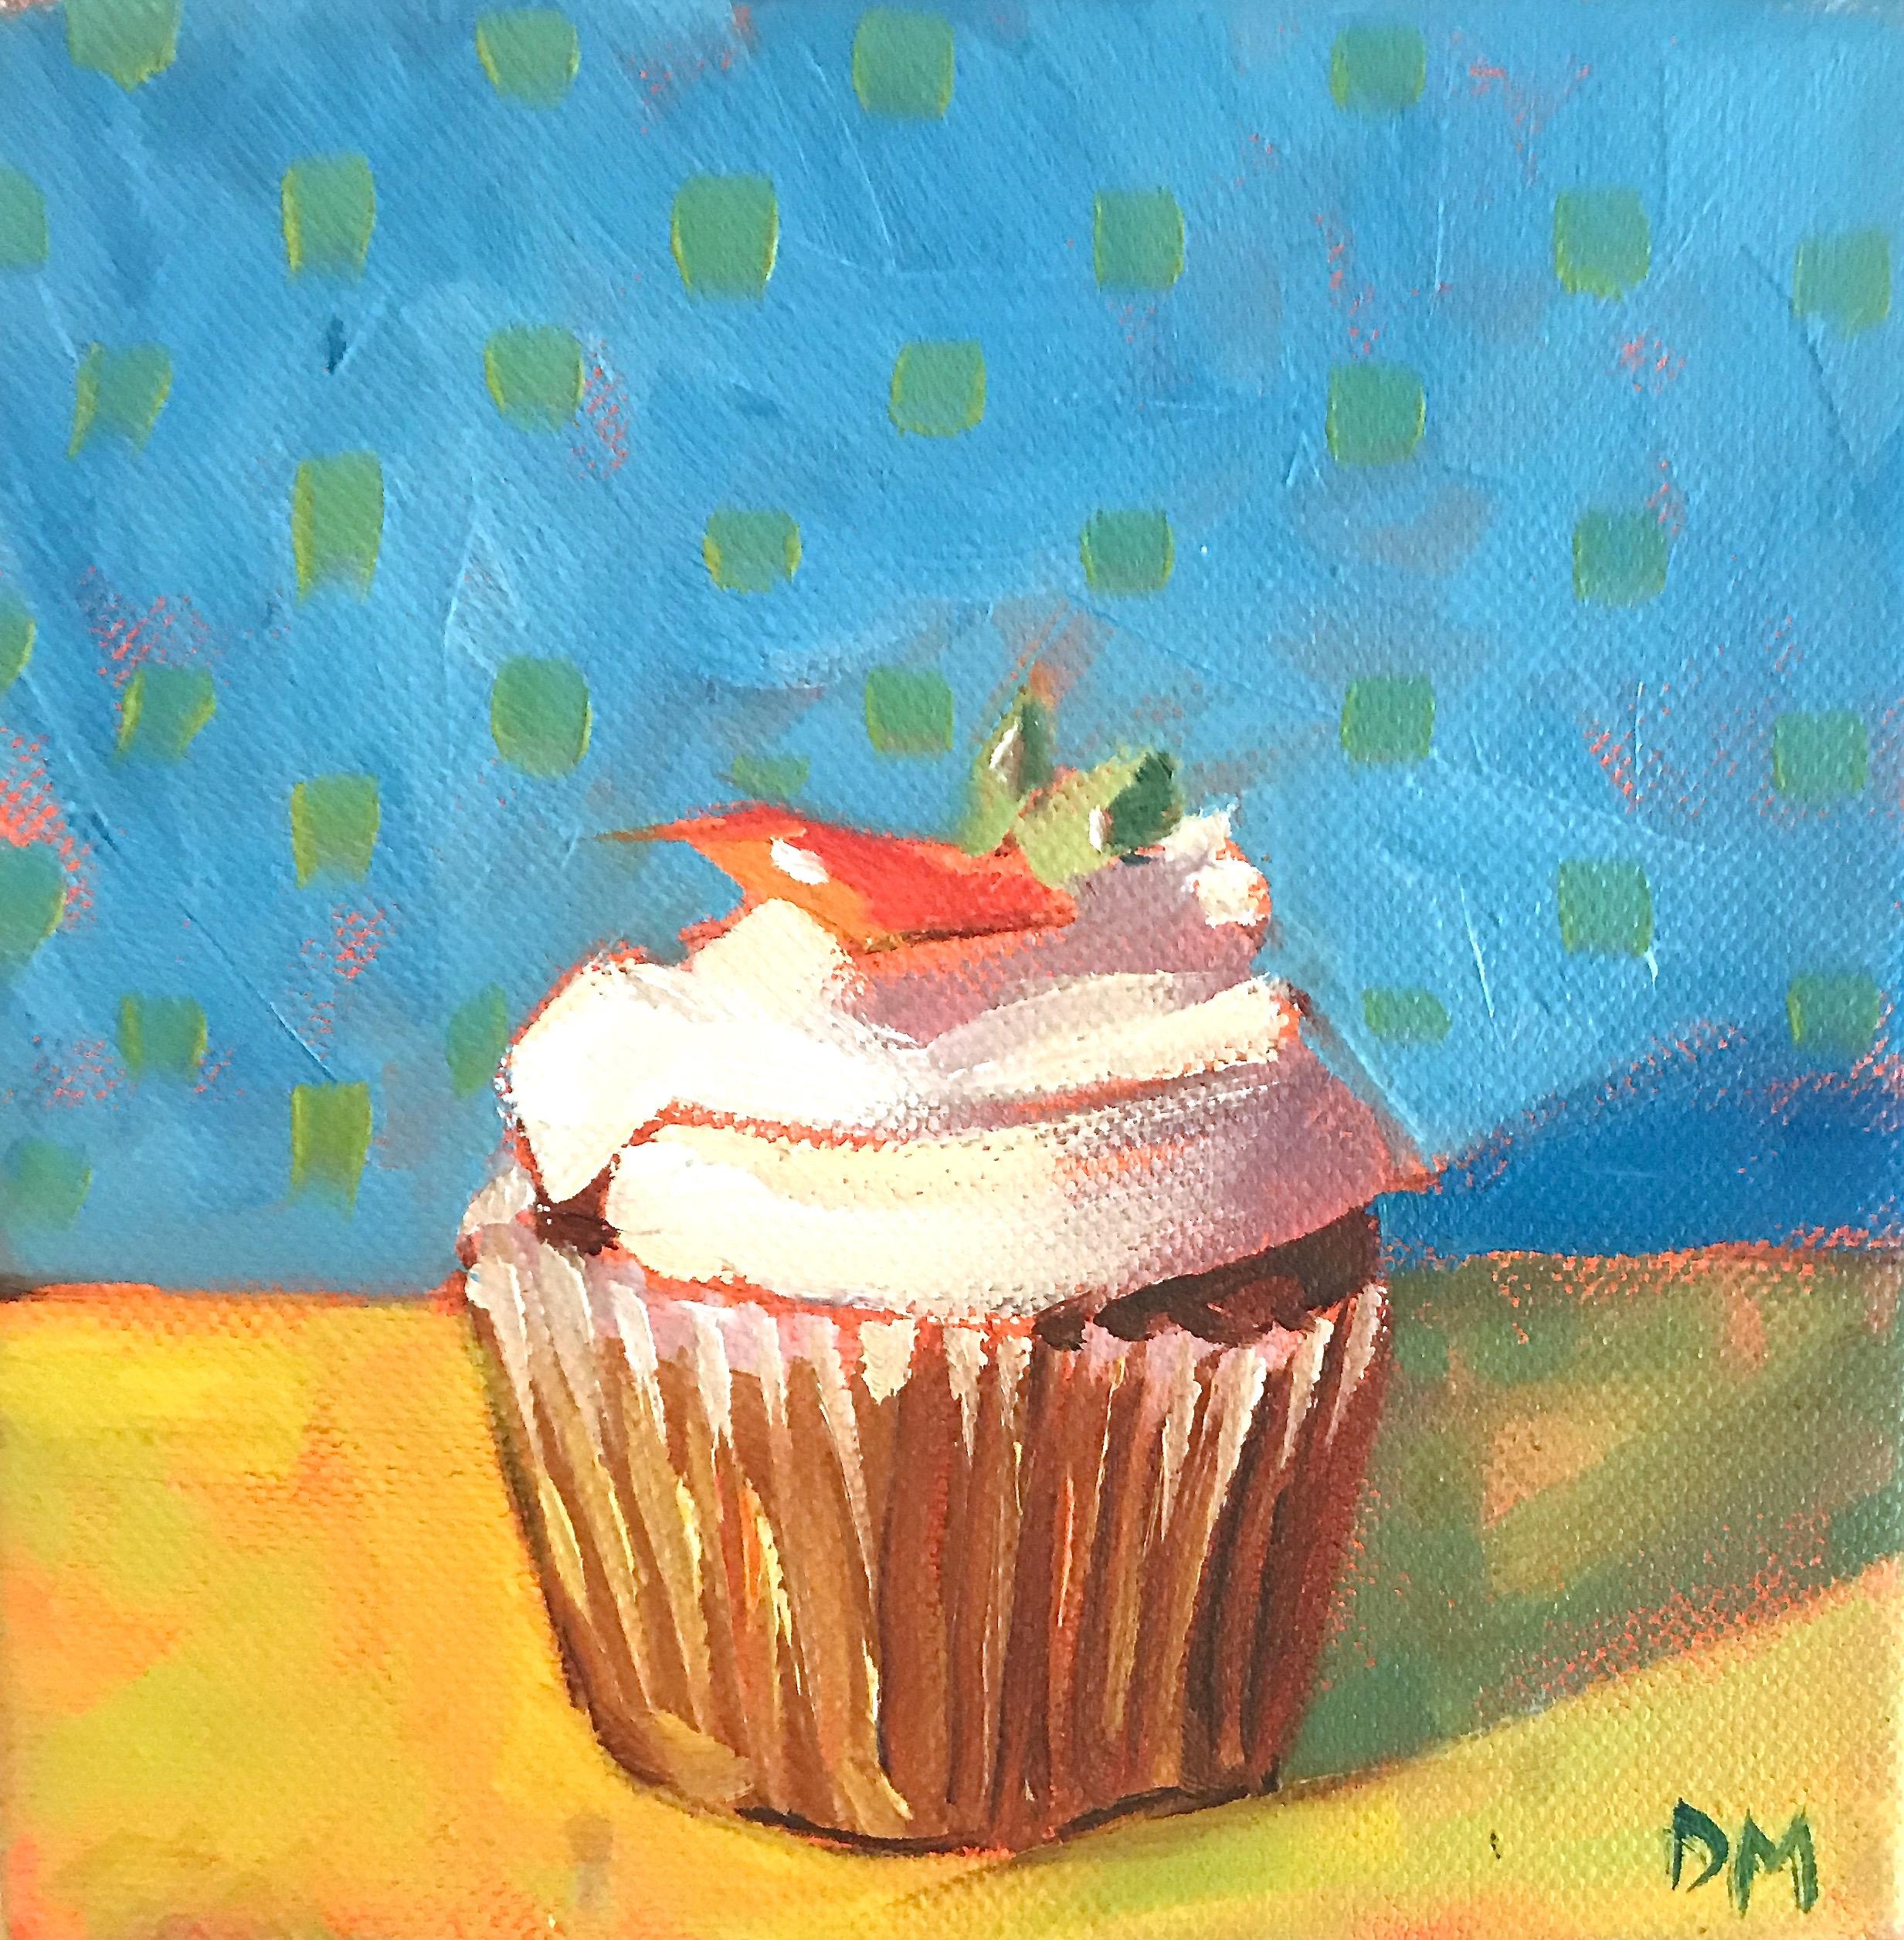 Debbie Miller Still-Life Painting - "Small Cupcake with White Frosting and Cherry on Blue and Yellow Background"